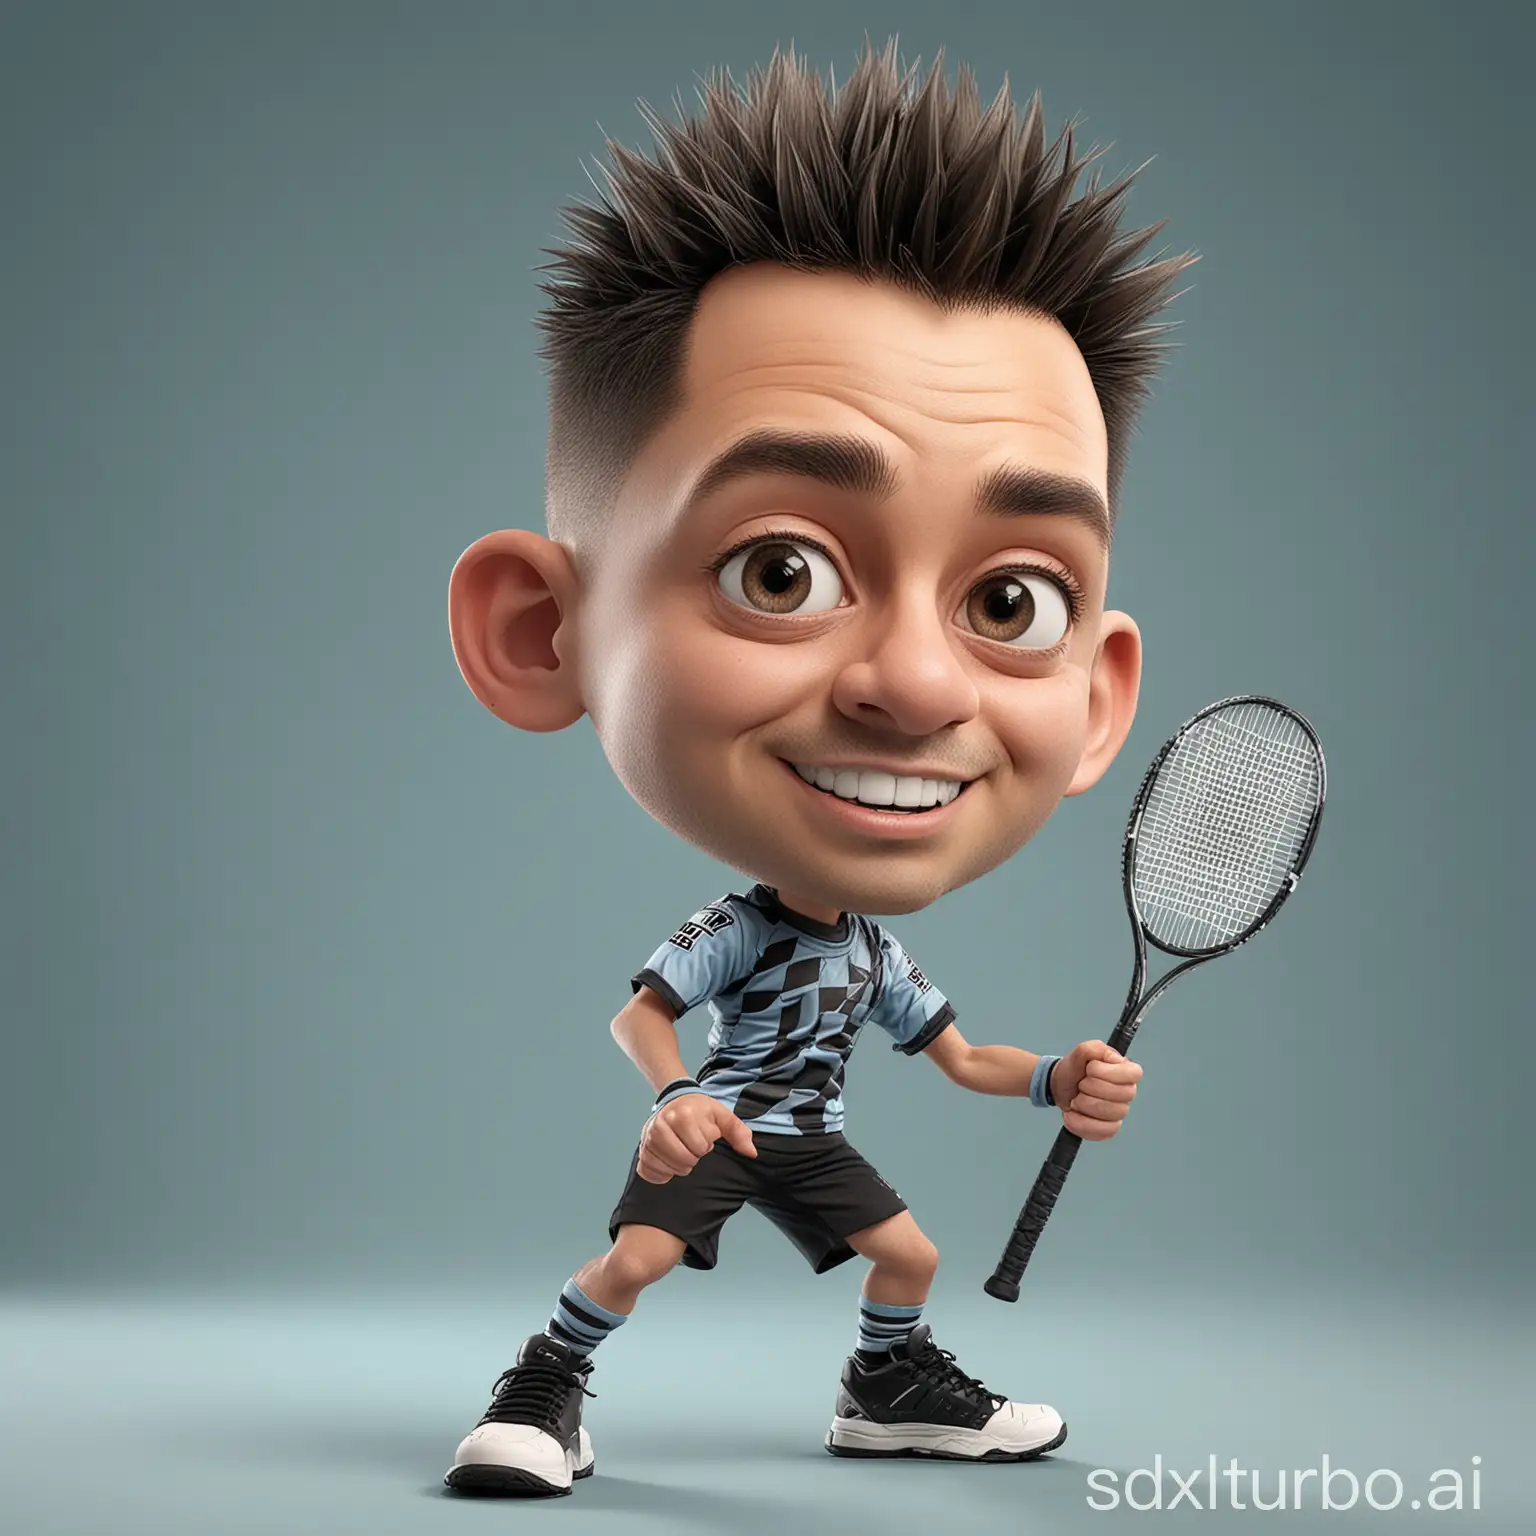 Dynamic-3D-Caricature-Badminton-Enthusiast-with-Spiky-Hair-and-Striped-Socks